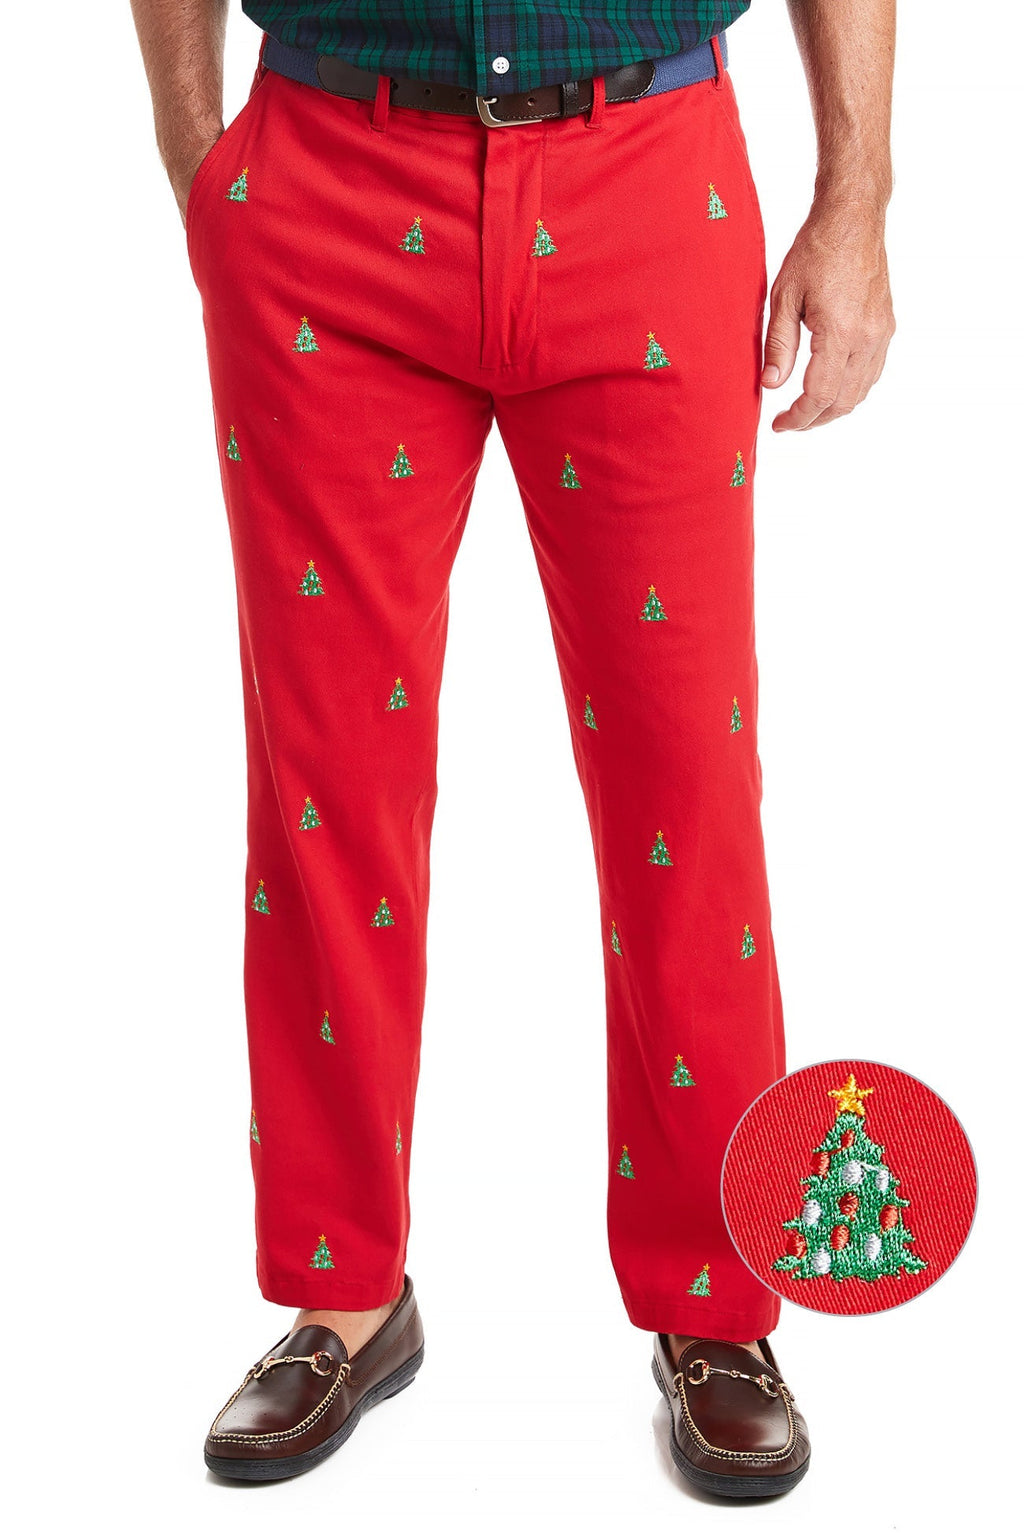 Harbor Pant Stretch Twill Bright Red with Christmas Tree MENS EMBROIDERED PANTS Castaway Nantucket Island